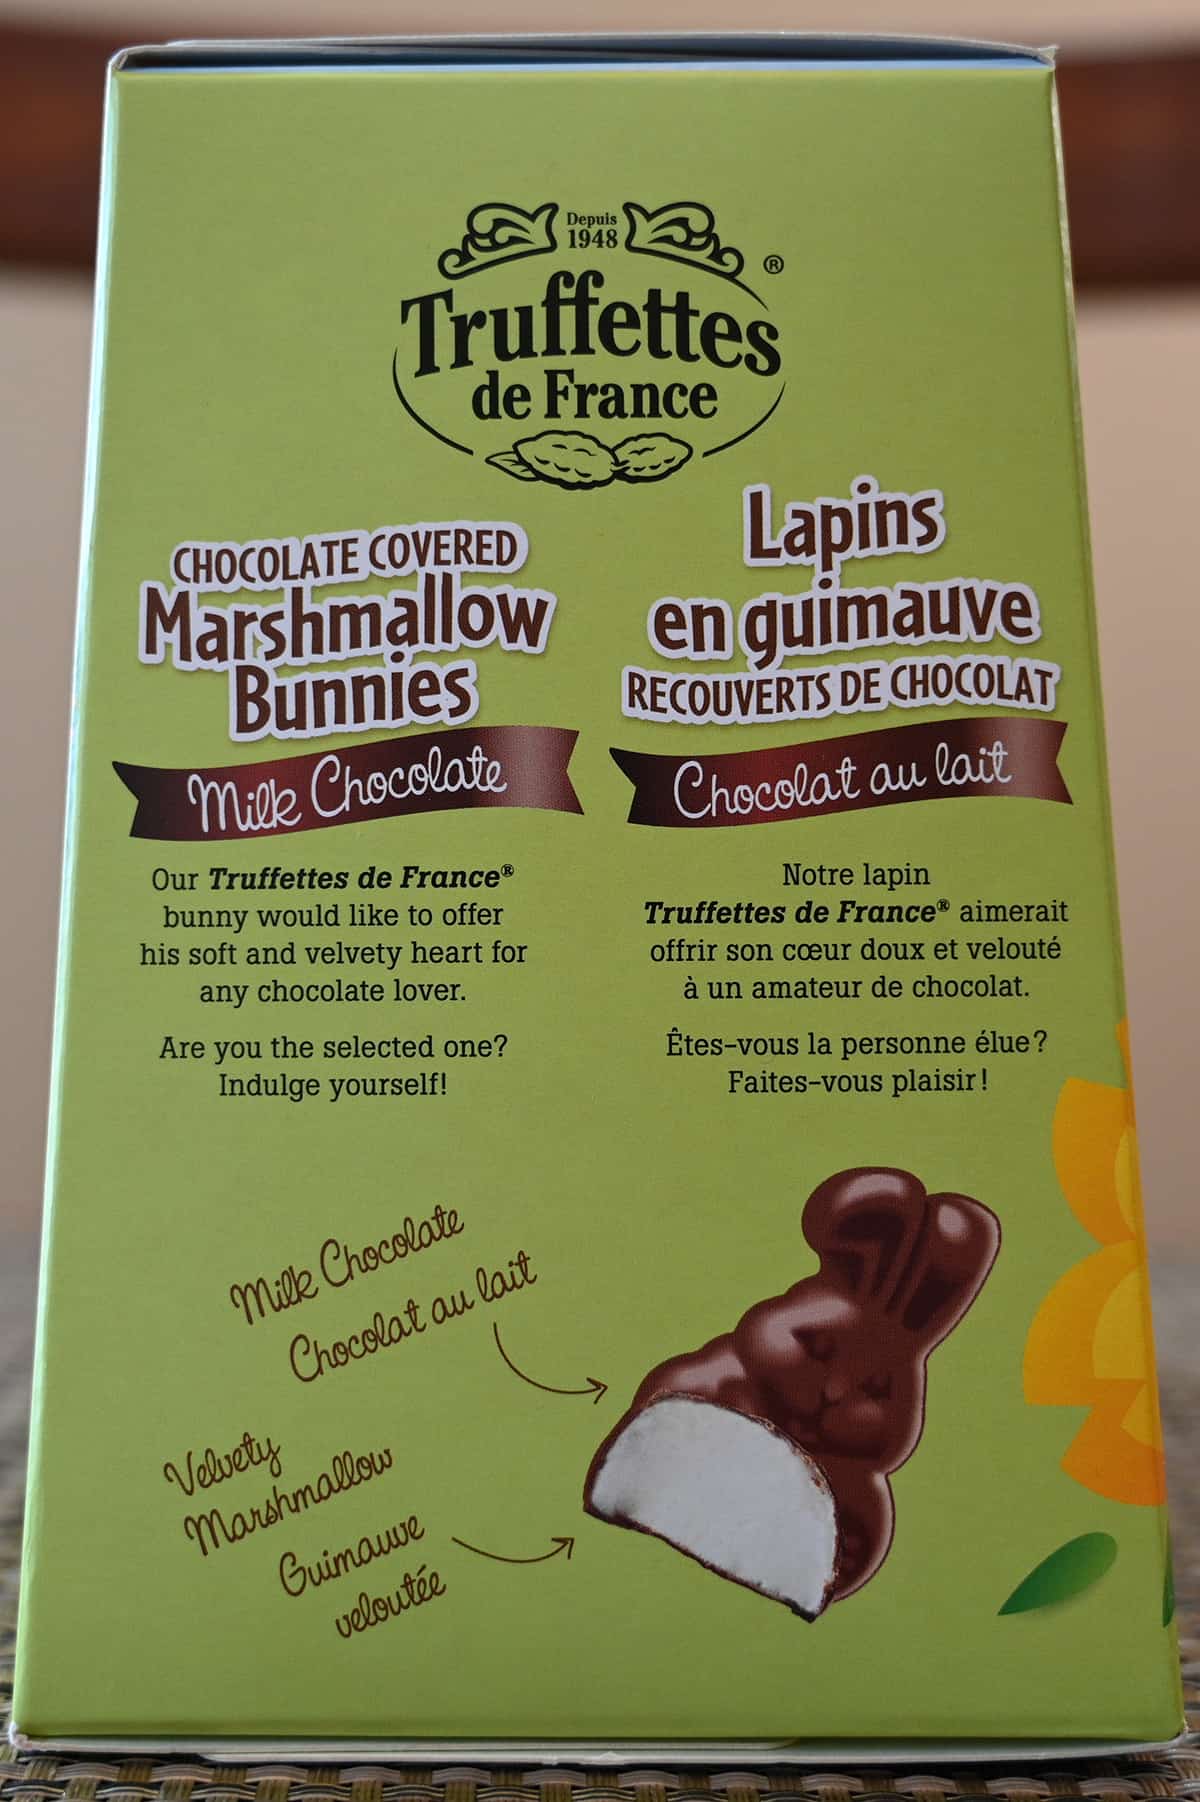 Image of the product description from the side of the box.